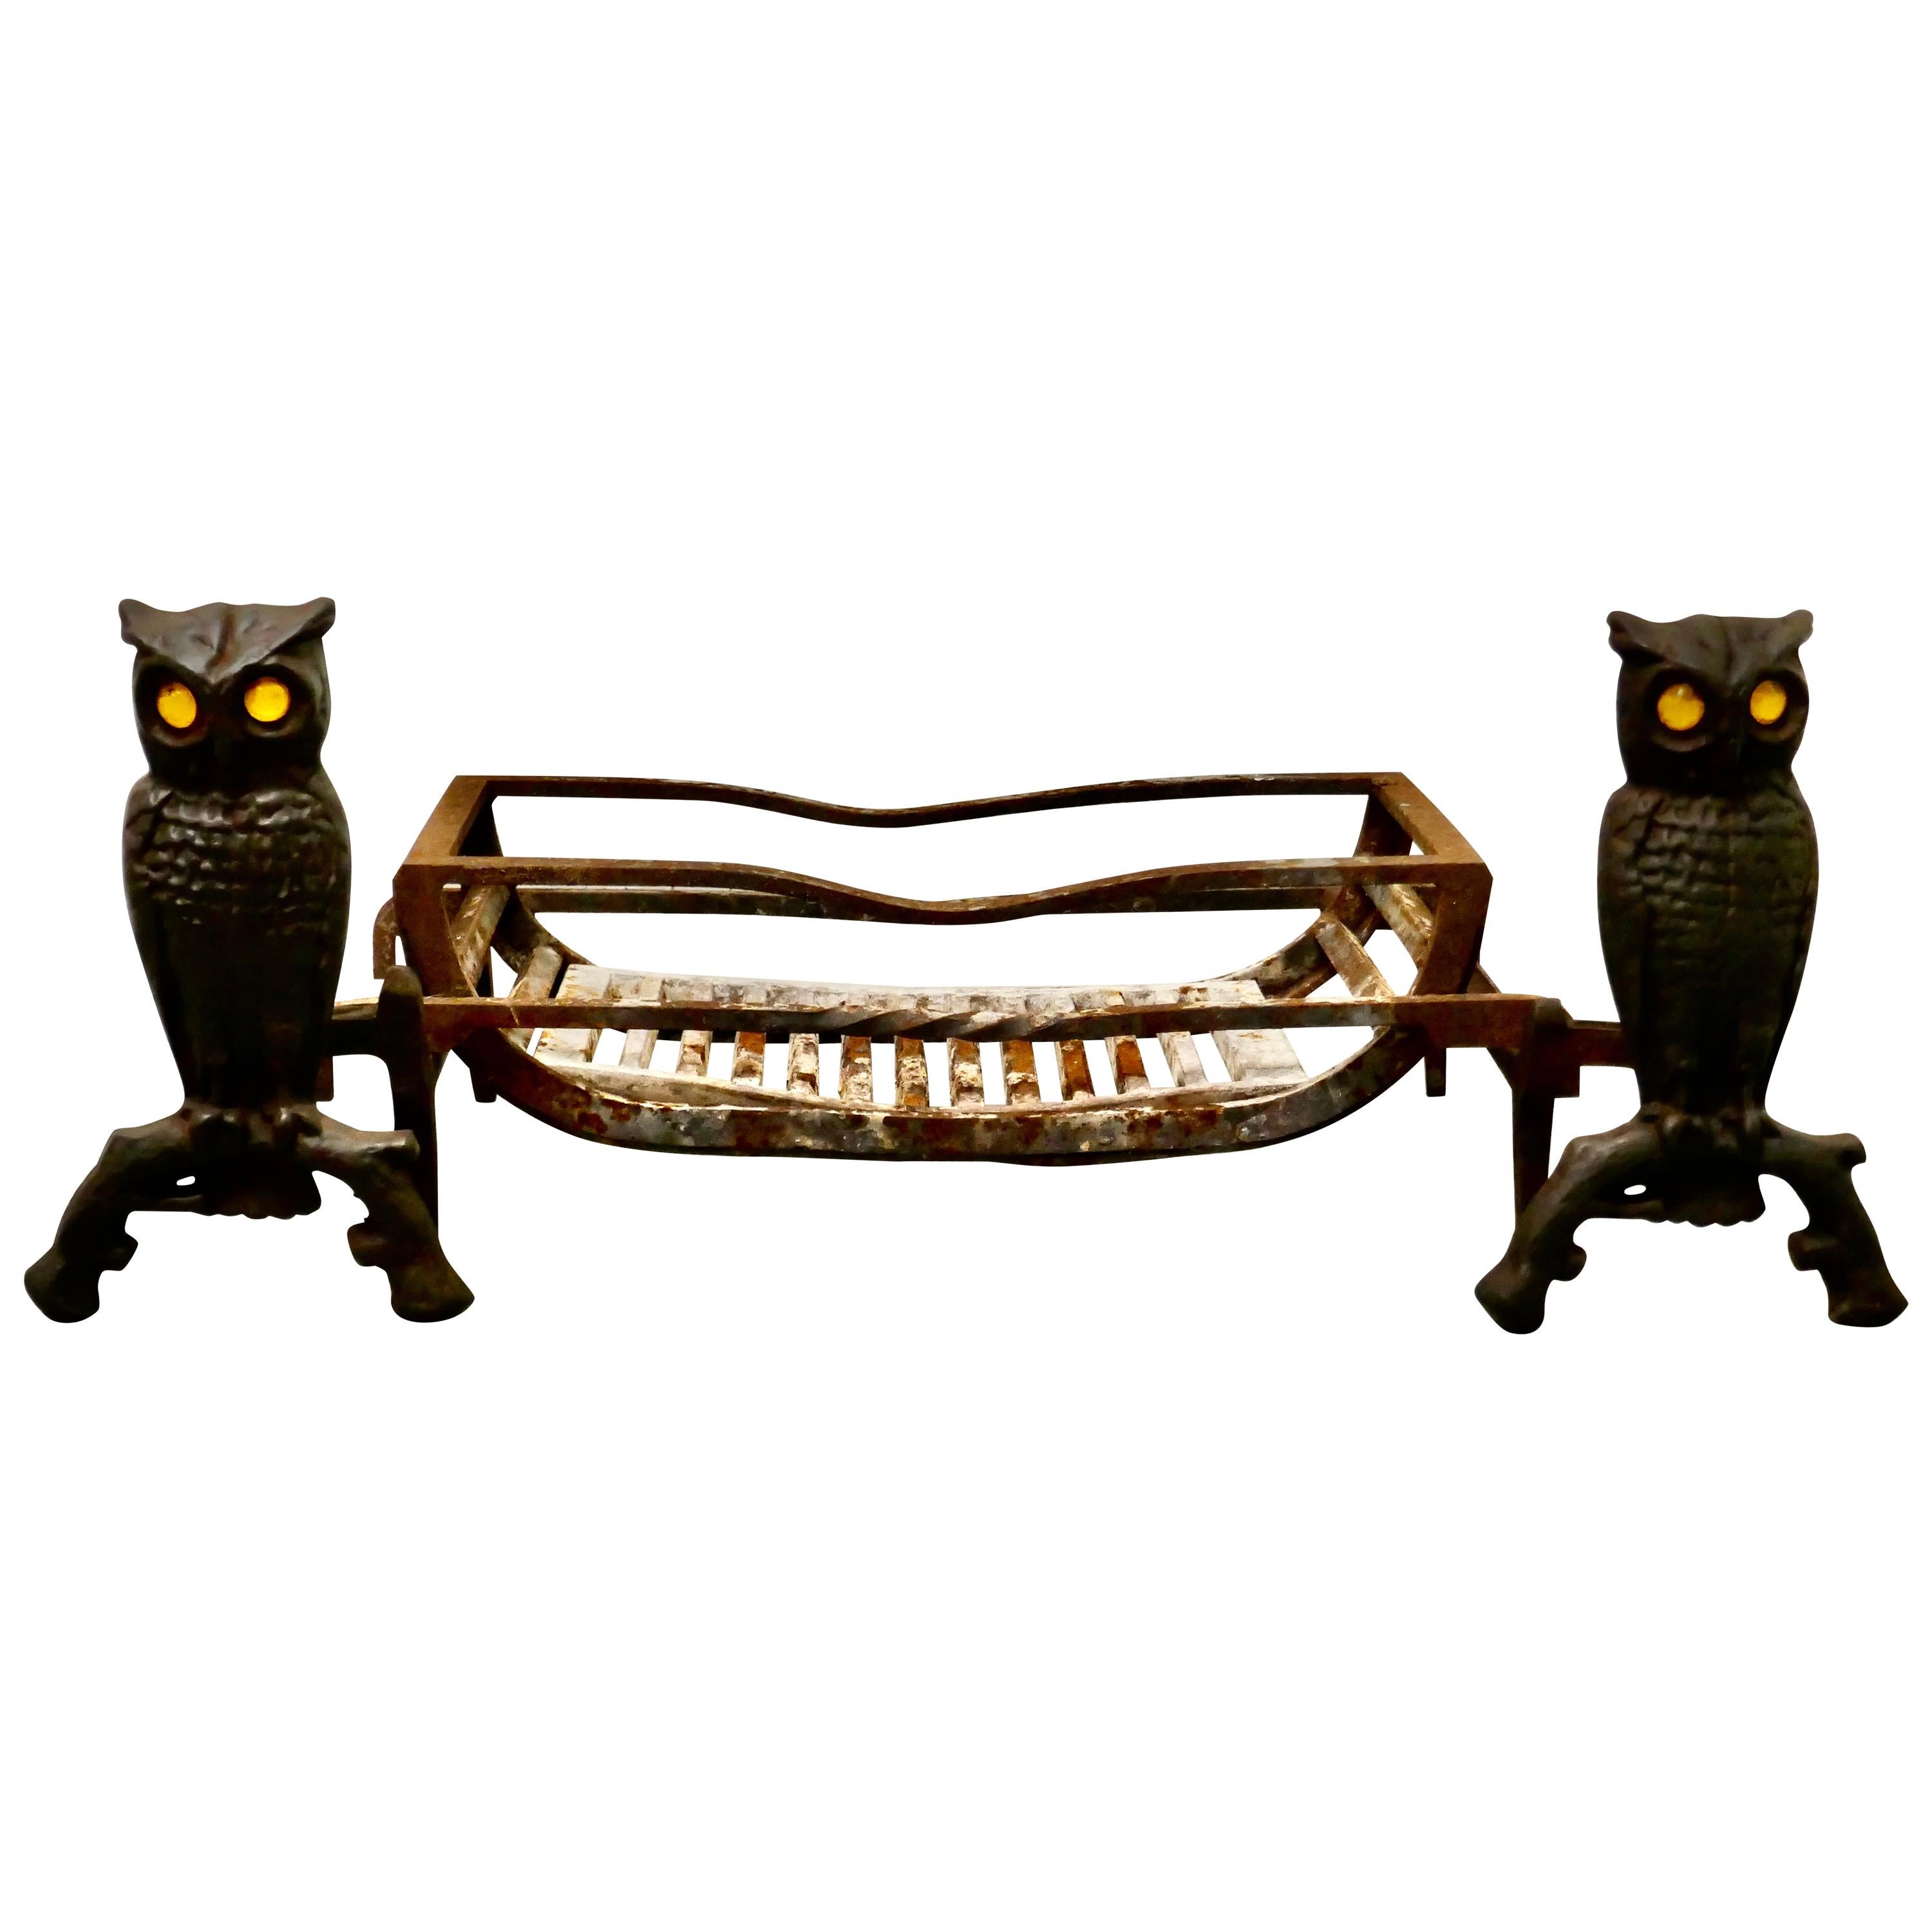 Quirky Model Owl Iron Andirons with Grate For Sale